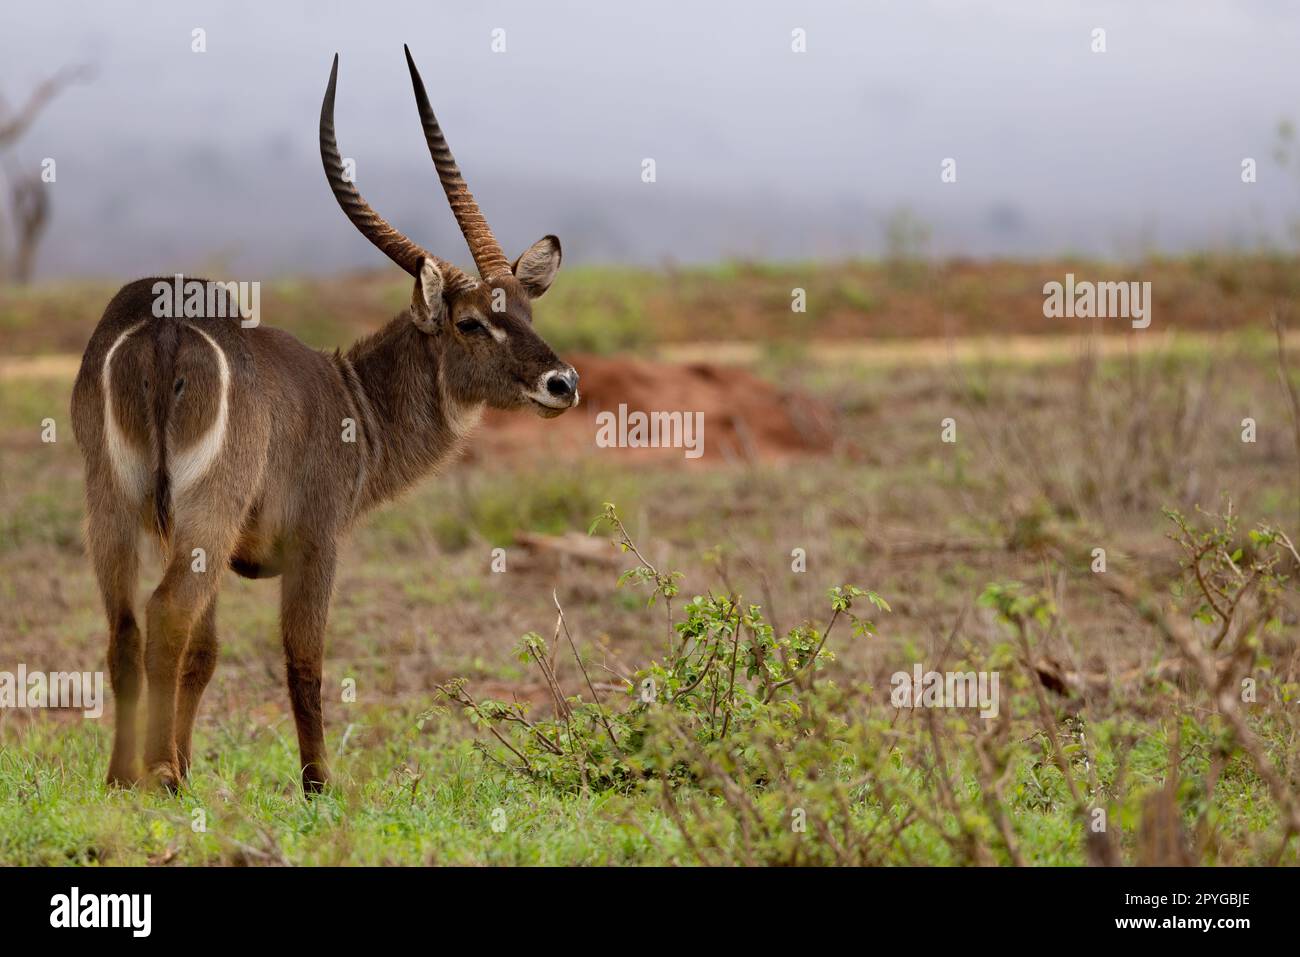 A close-up photo of a waterbuck standing on the dry savannah grass, looking off into the distance with its distinctive white ringed bottom and curved Stock Photo